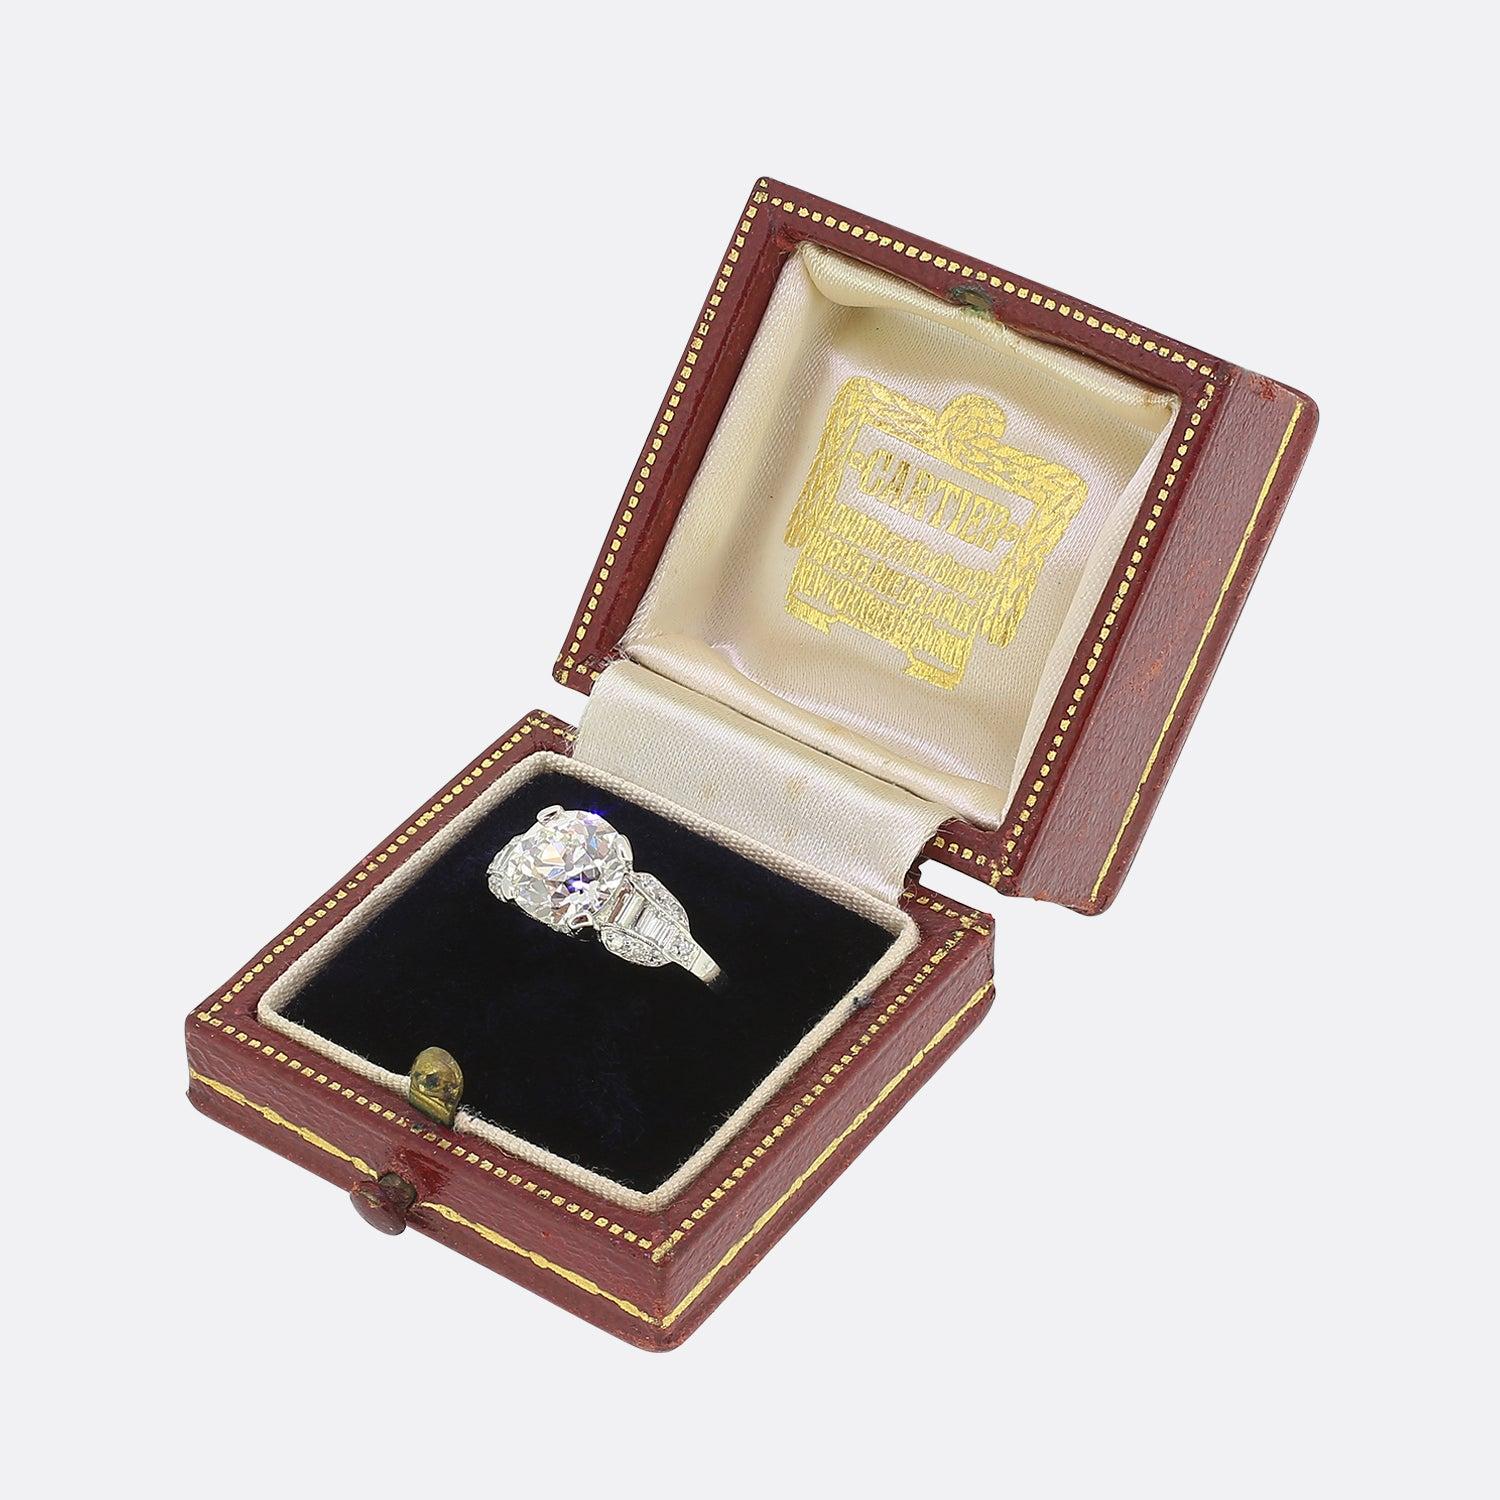 Here we have a marvellous diamond engagement ring from the world renowned jewellery house of Cartier. Crafted from platinum at a time when the Art Deco style was at the height of design, this piece showcases a single round faceted old mine cut